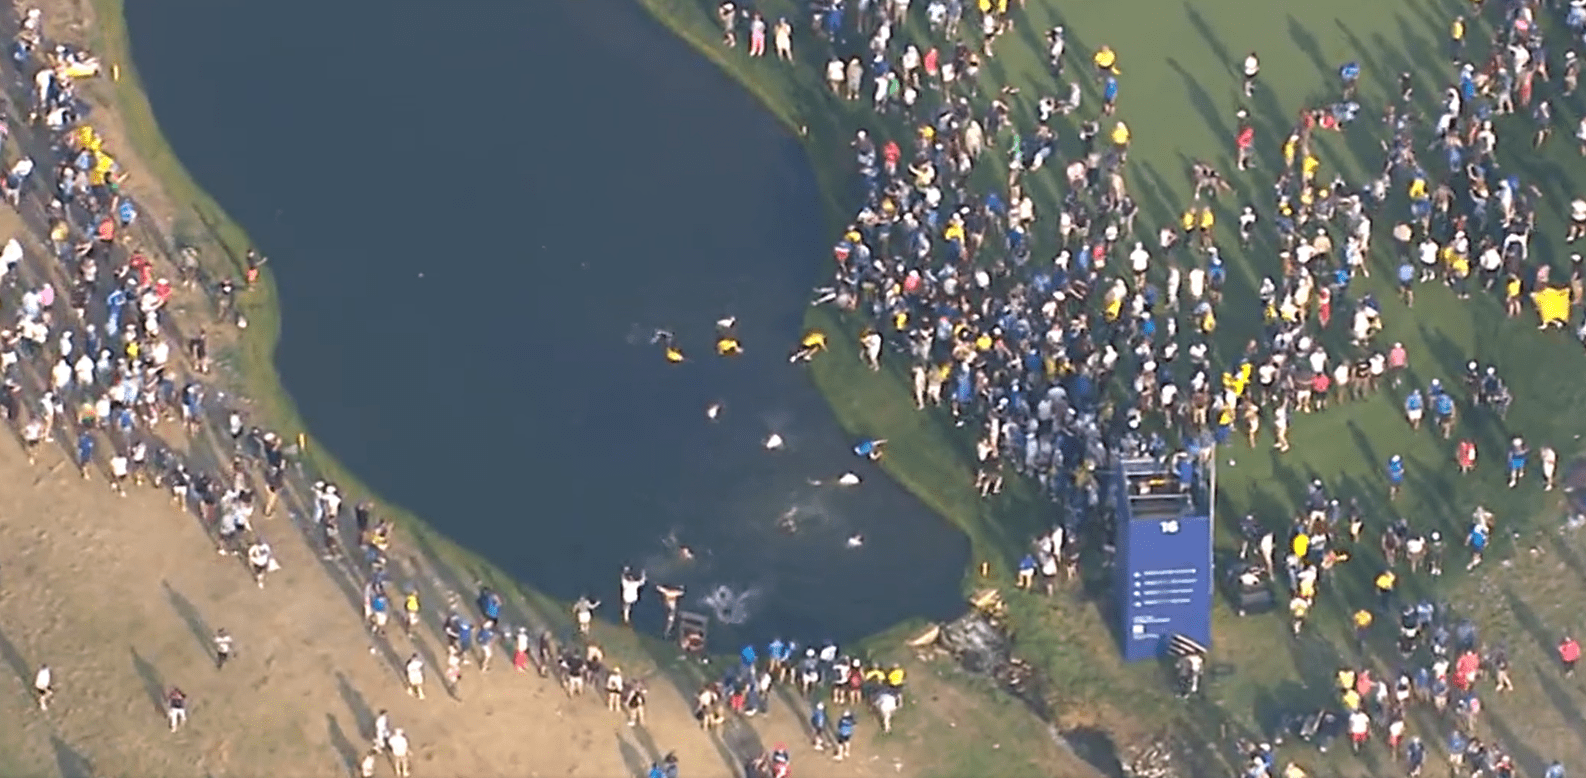 , Ryder Cup Pandemonium as European Fans Dive Into Lake in Celebration, Led by Enthusiastic Grey-Haired Supporter